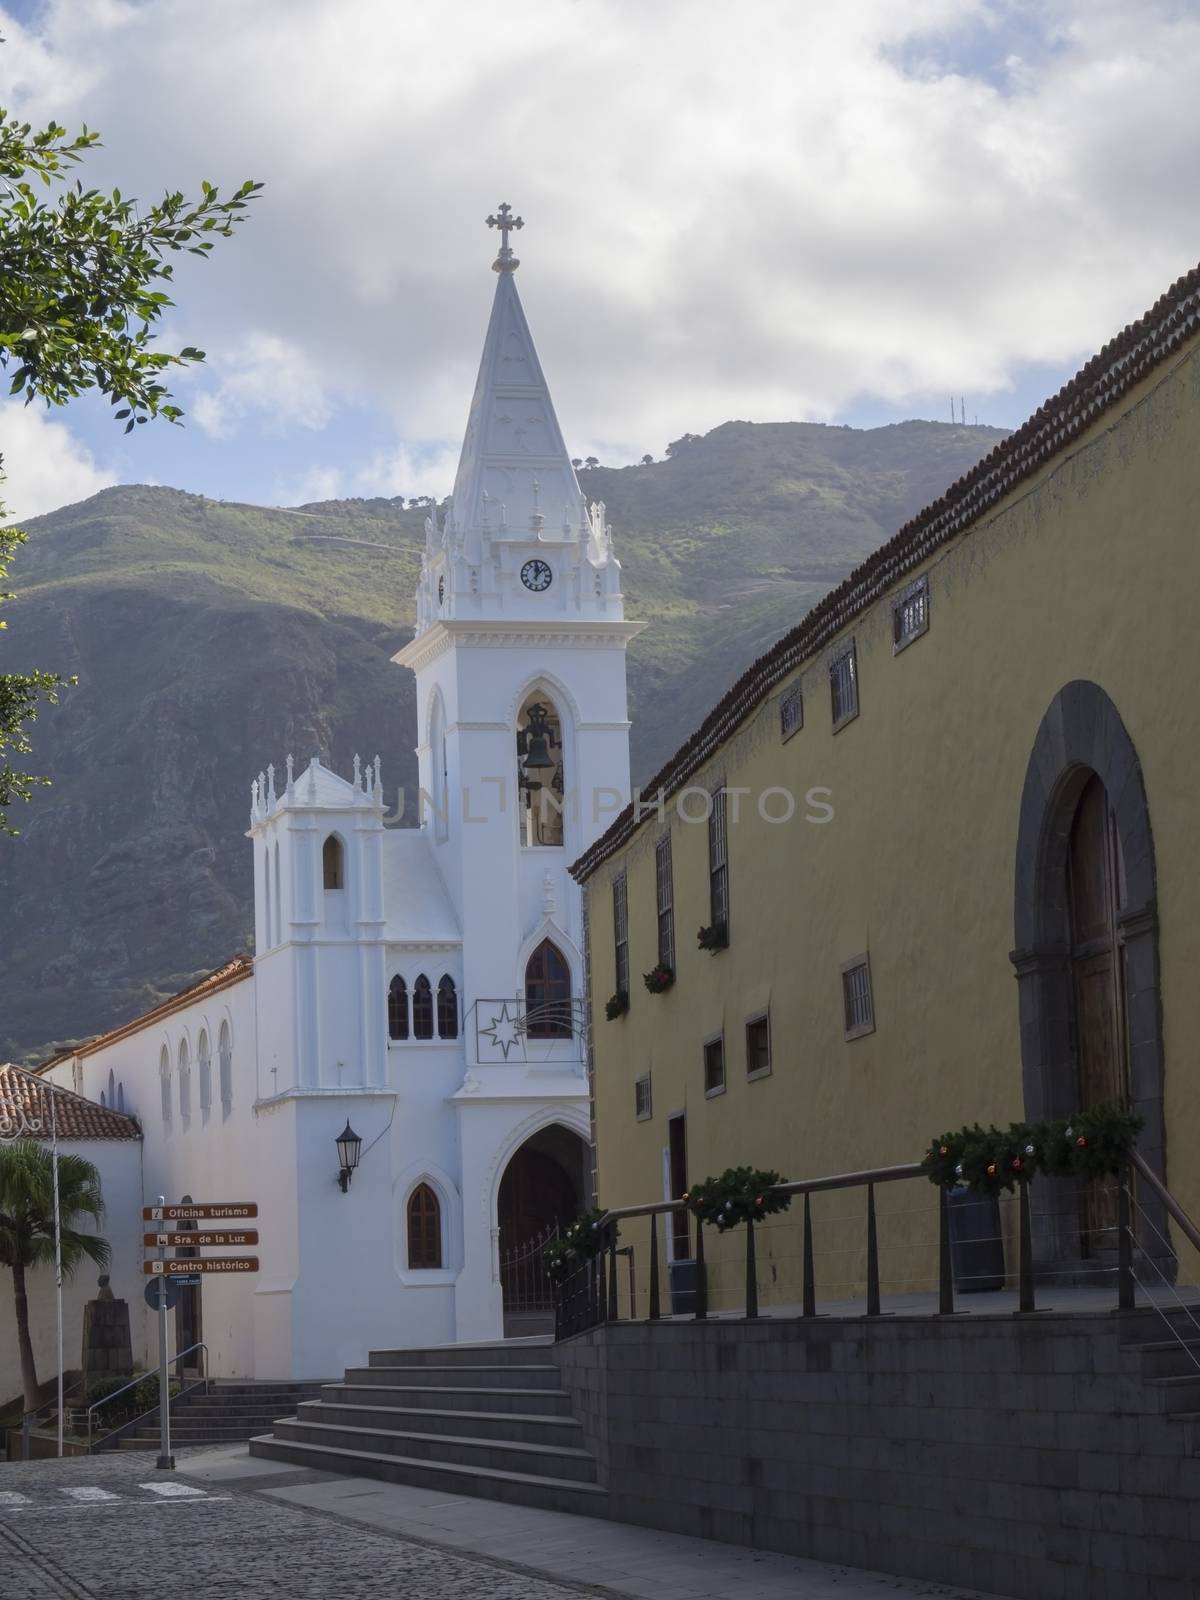 white church and historic buildings in old village Los Silos in tenerife Canary Islands with green hills in background